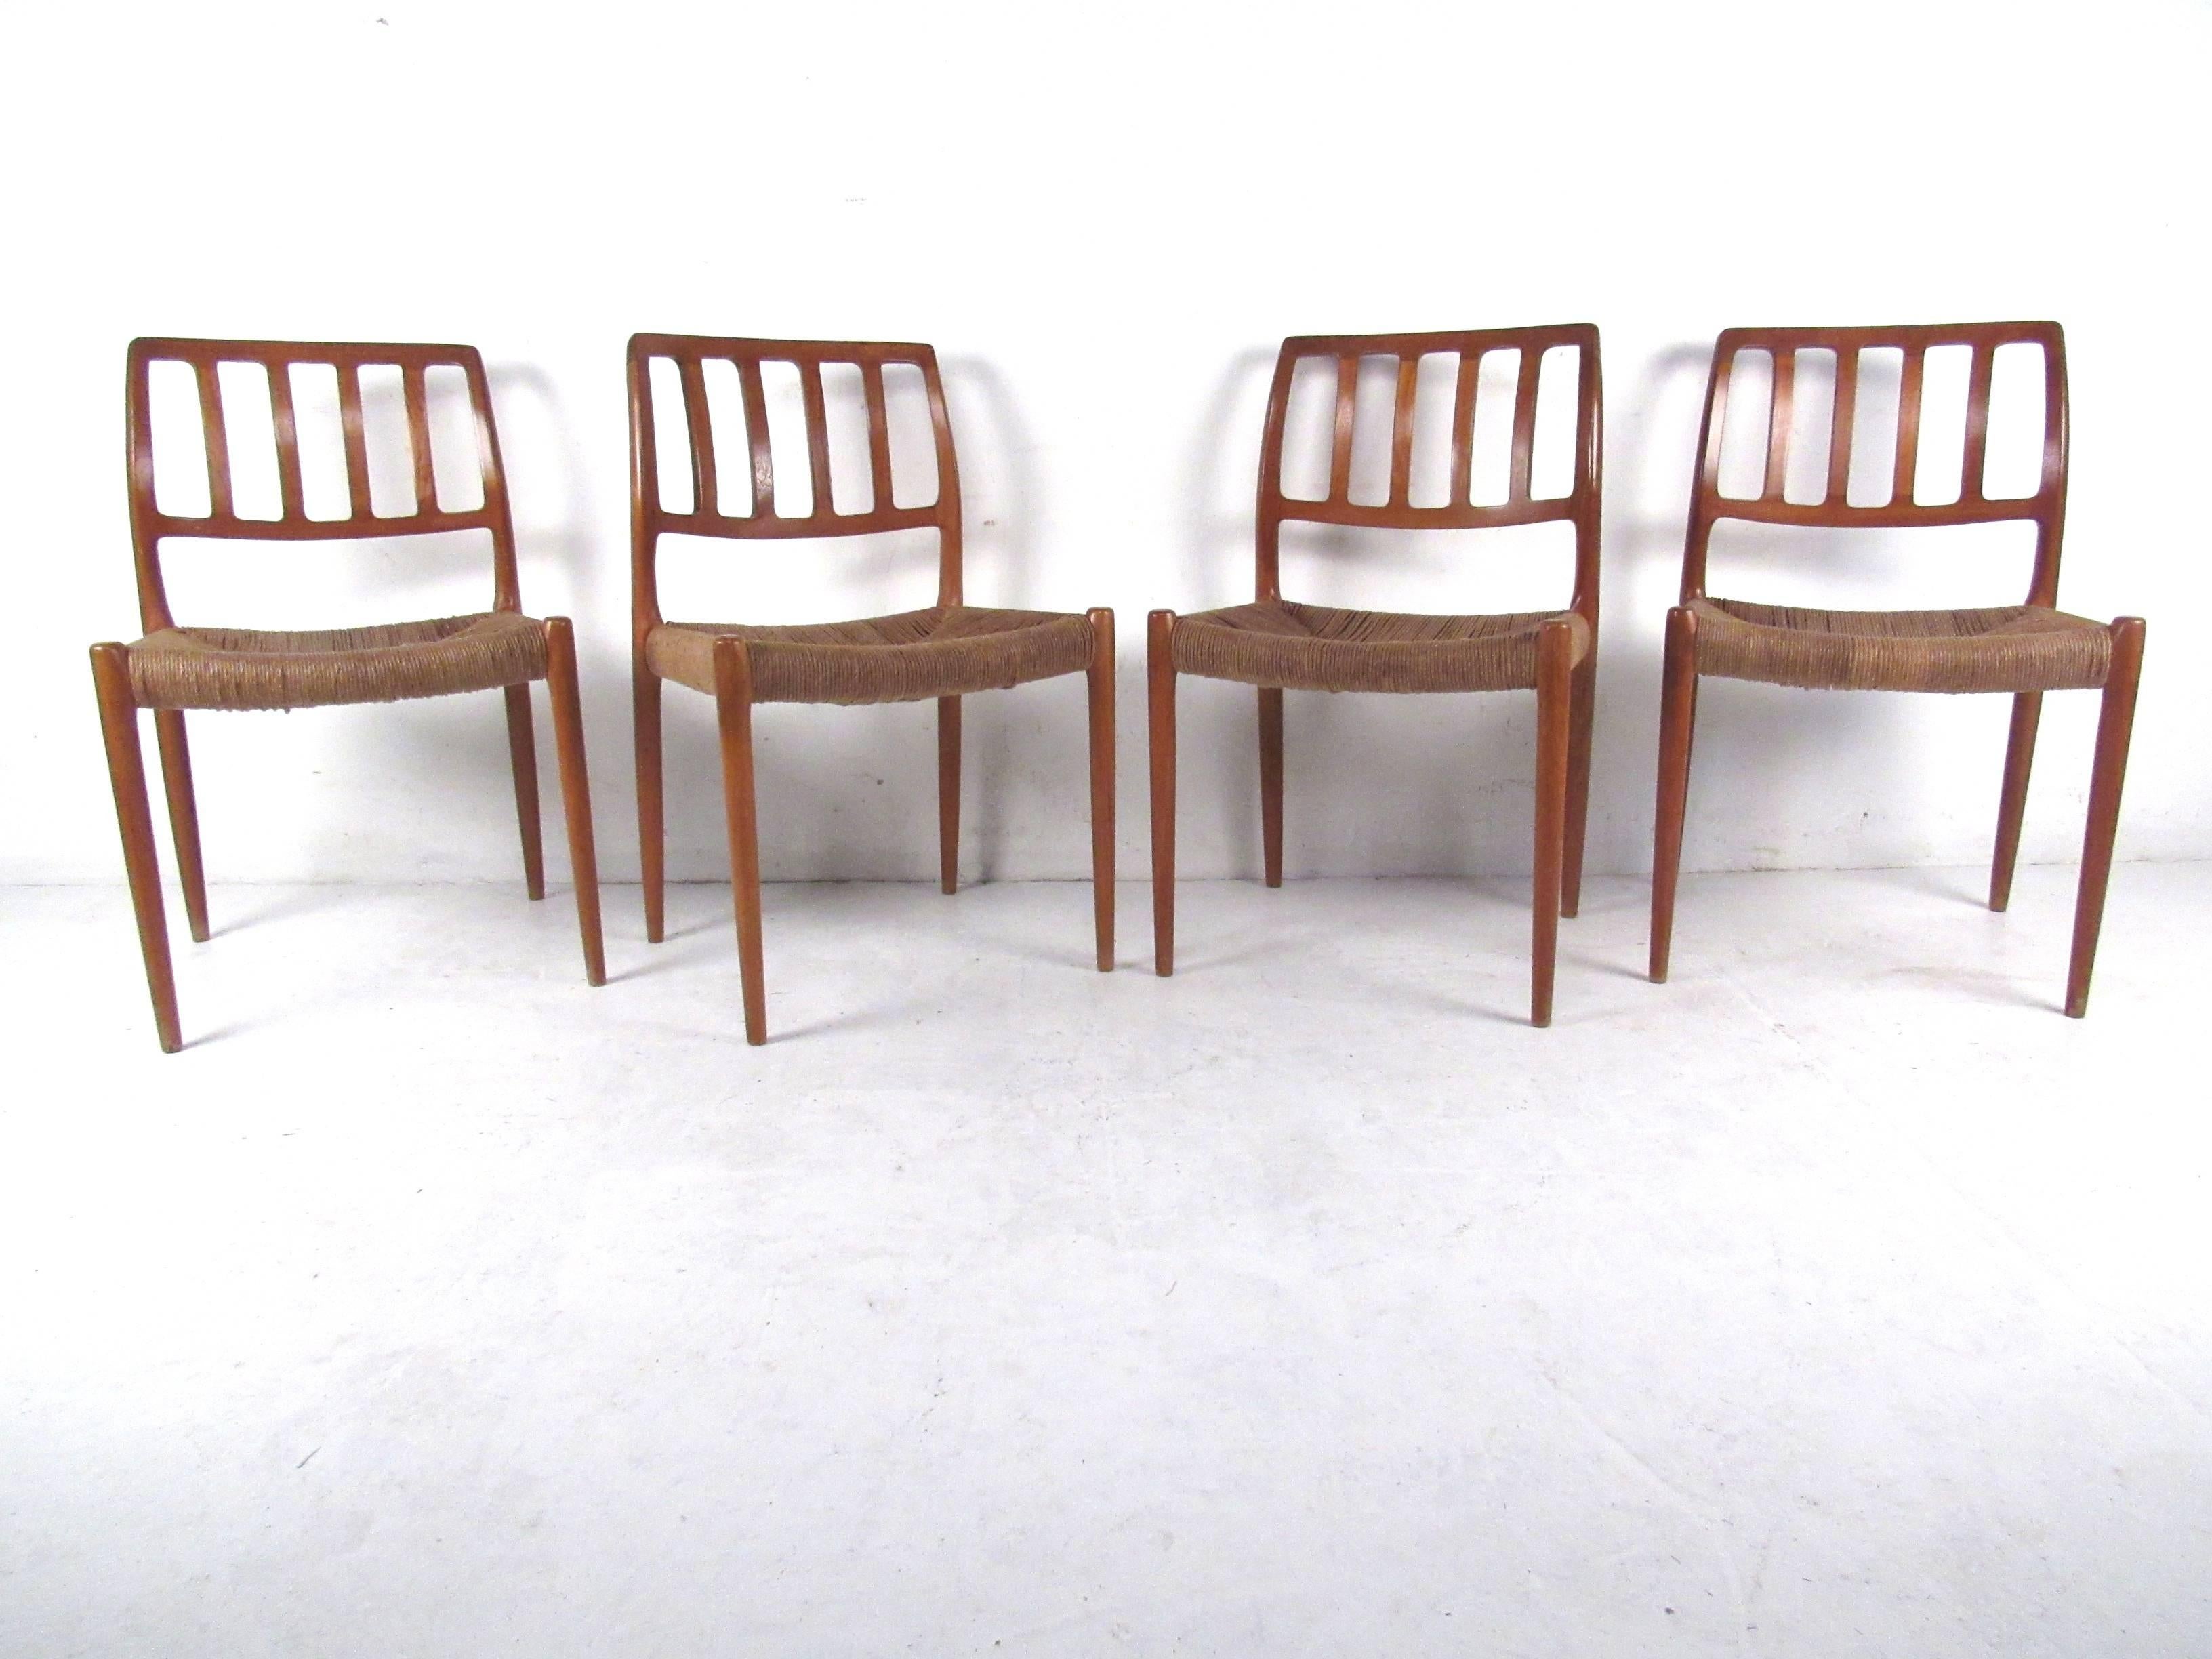 This gorgeous set of four dining chairs designed by N.O. Møller features woven rush seats and unique sculpted backs. These beautiful chairs make an impressive statement in any setting. Please confirm location (NY or NJ).